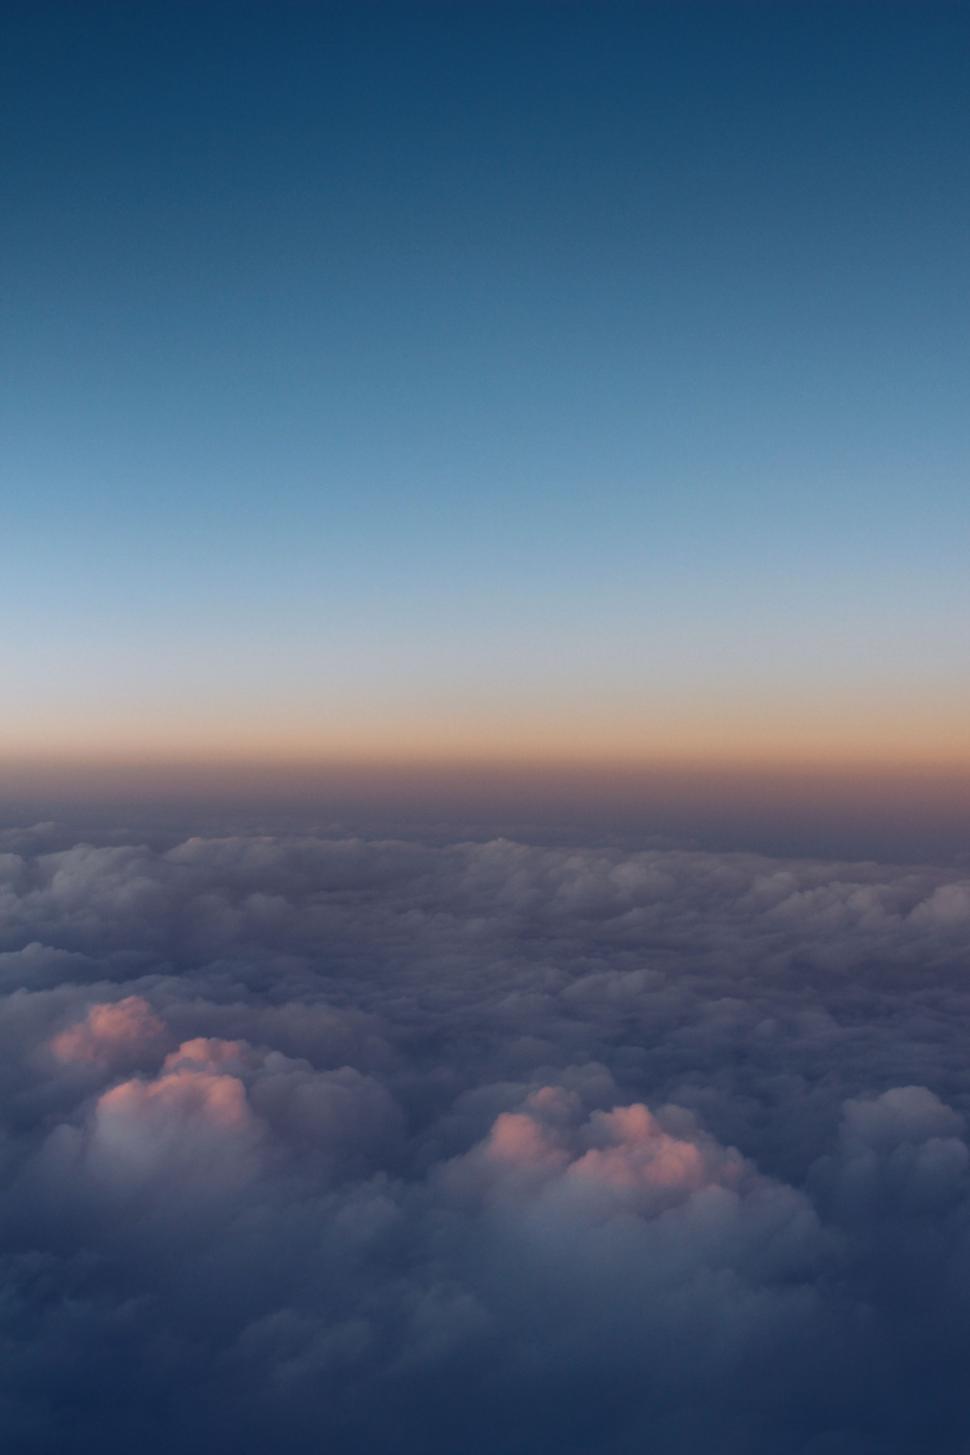 Free Image of A View of the Sky From an Airplane Window 